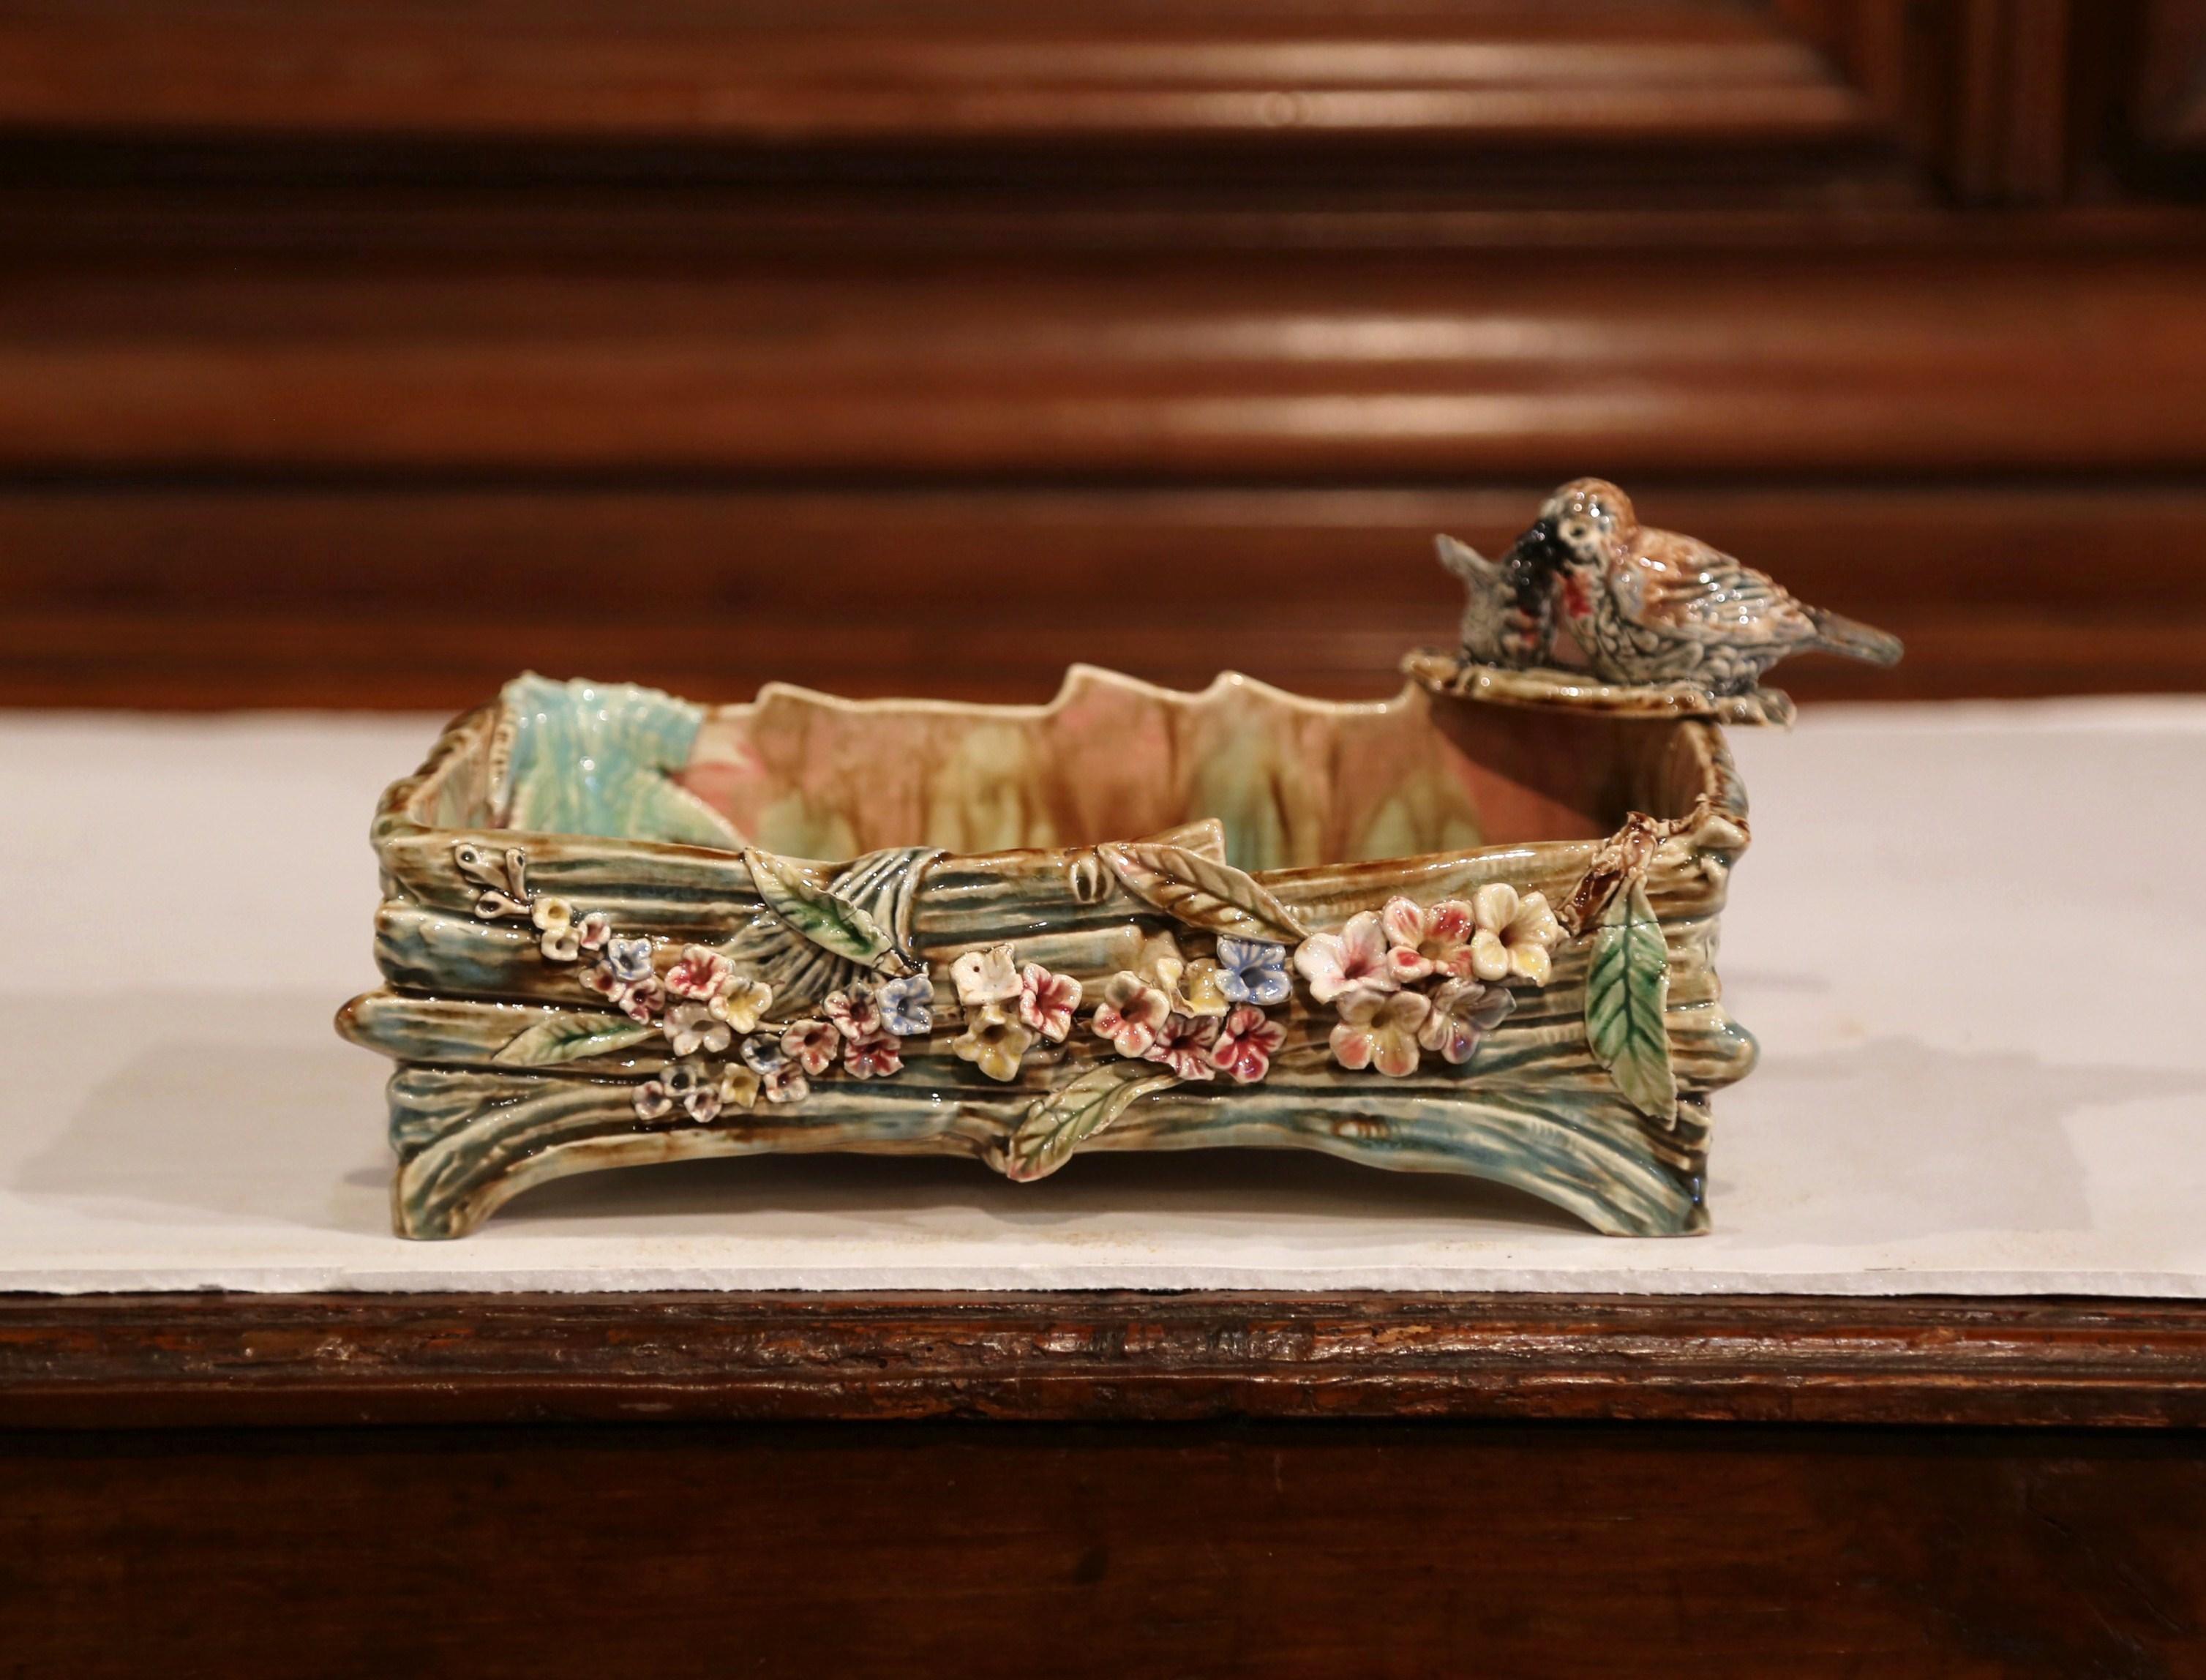 This antique colorful majolica planter was created in France, circa 1920. The rectangular cache pot is decorated with foliage decor and features two birds standing in one corner. The front of the ceramic dish is embellished by small flowers in high